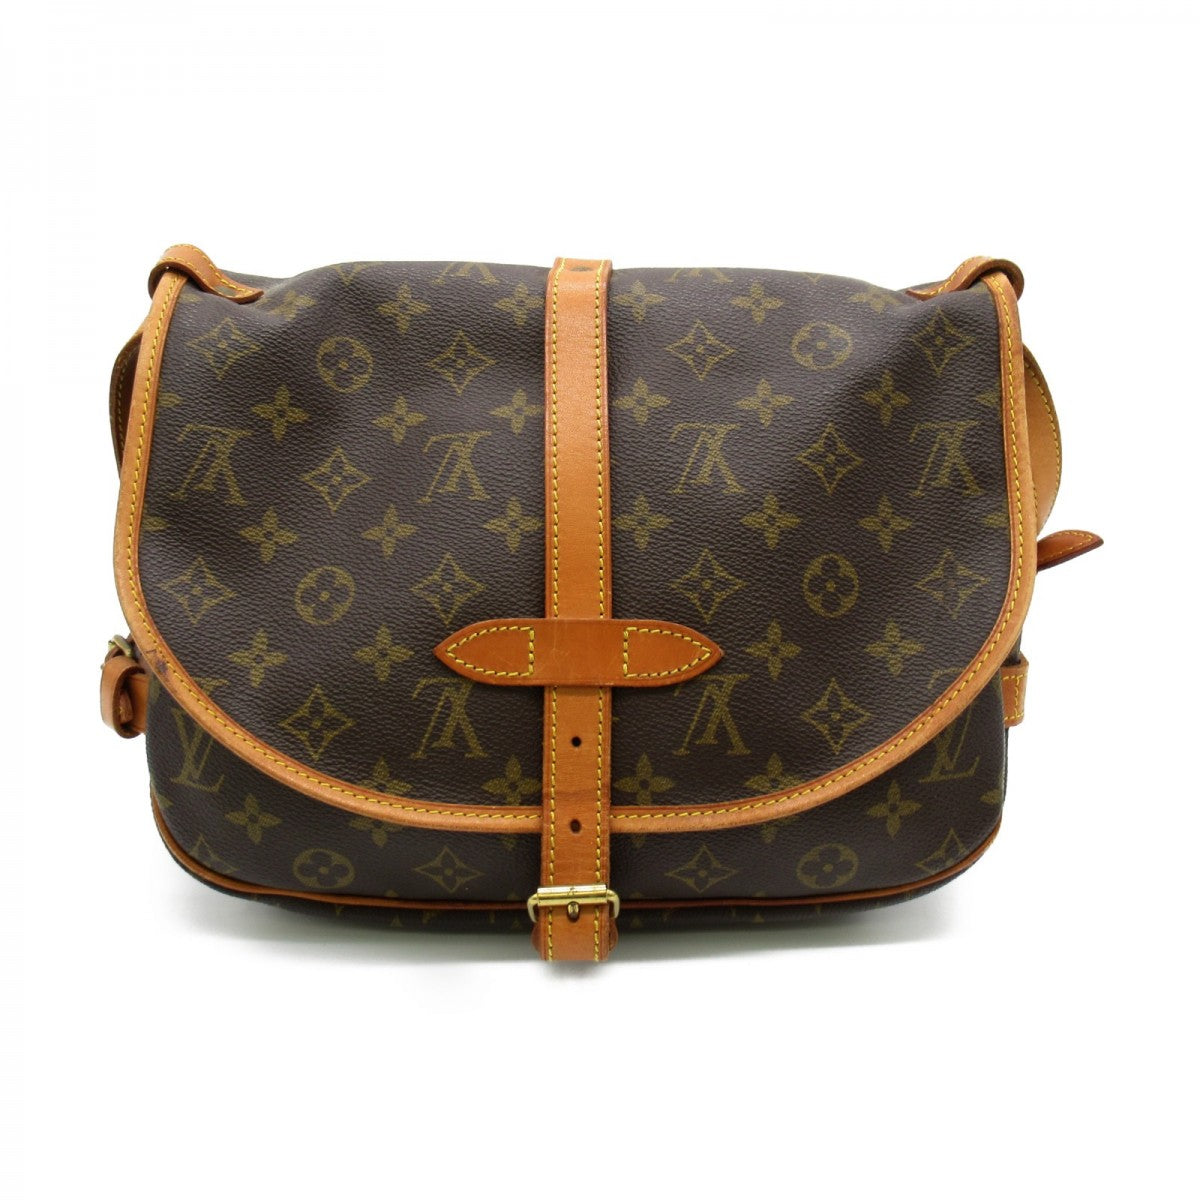 Fast & Professional Translation Service - Louis Vuitton Backpack